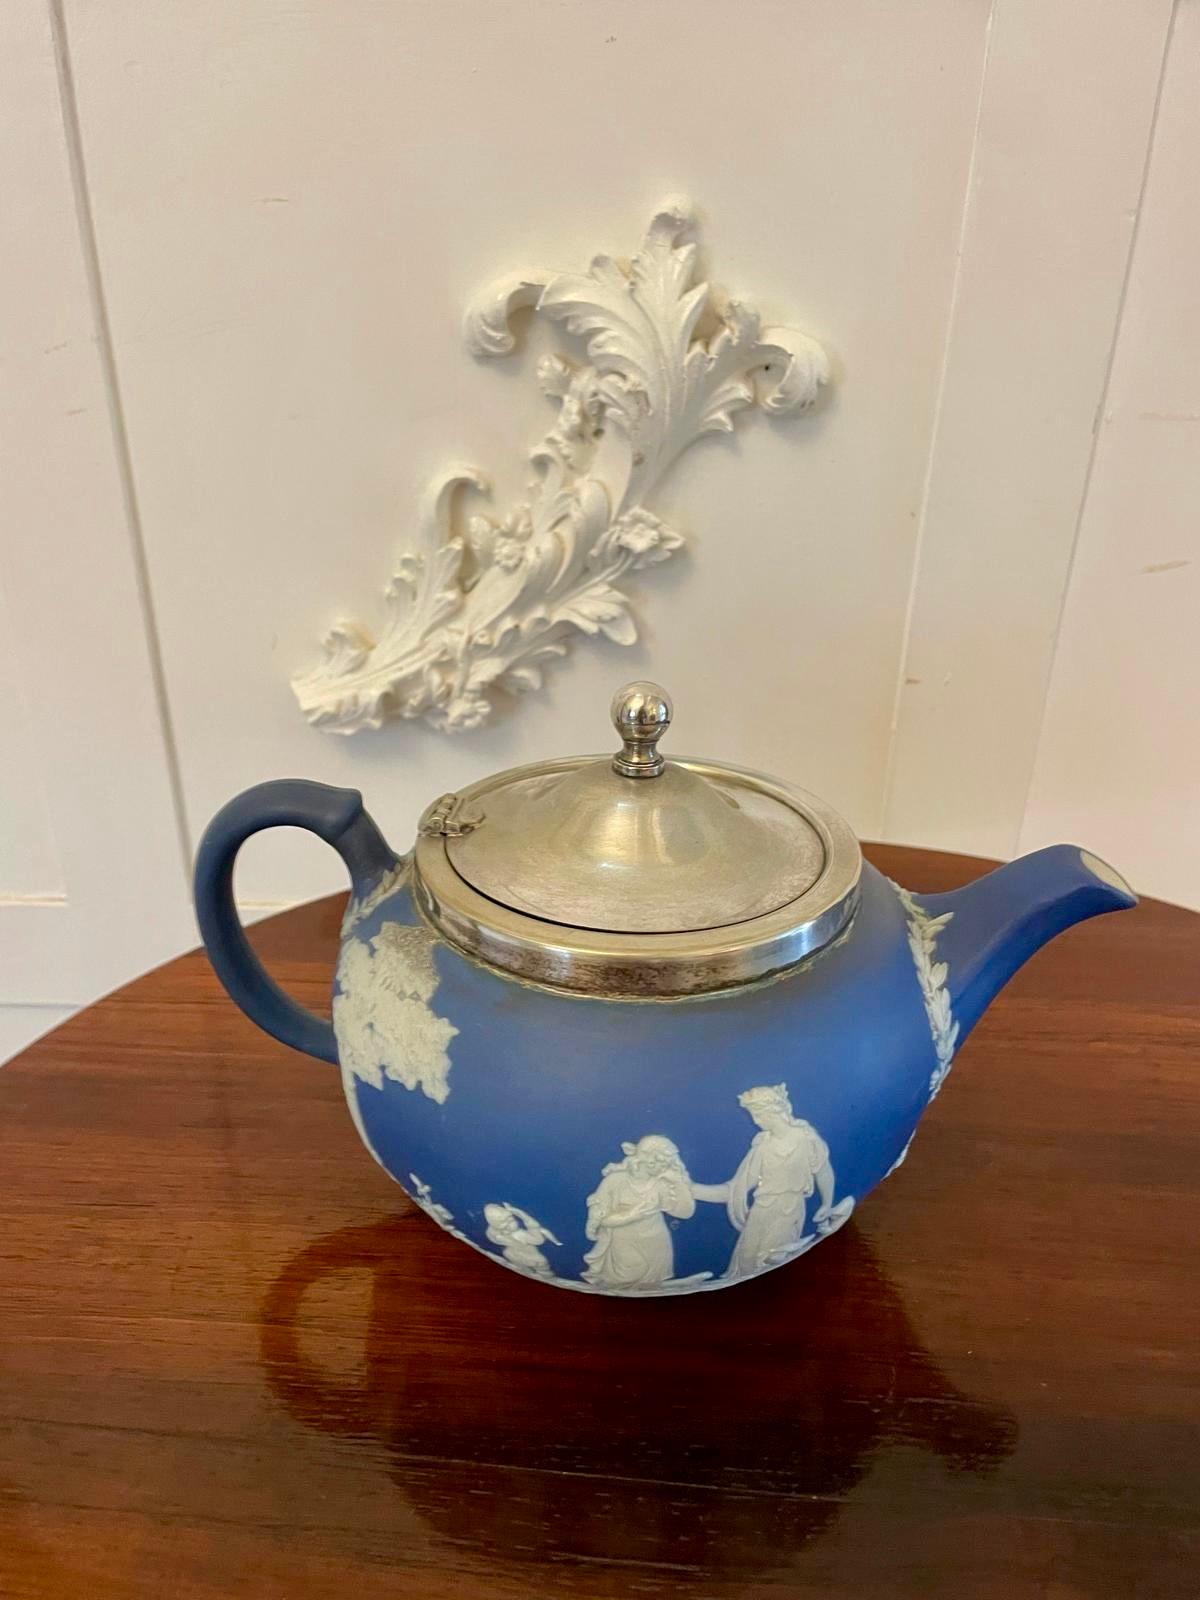 Antique Edwardian quality Wedgwood Jasperware teapot having a quality silver plated lid and rim decorated in the traditional Wedgwood blue and white colours 


In lovely original condition


Sugar bowl is available separately 


Dimensions:
Height